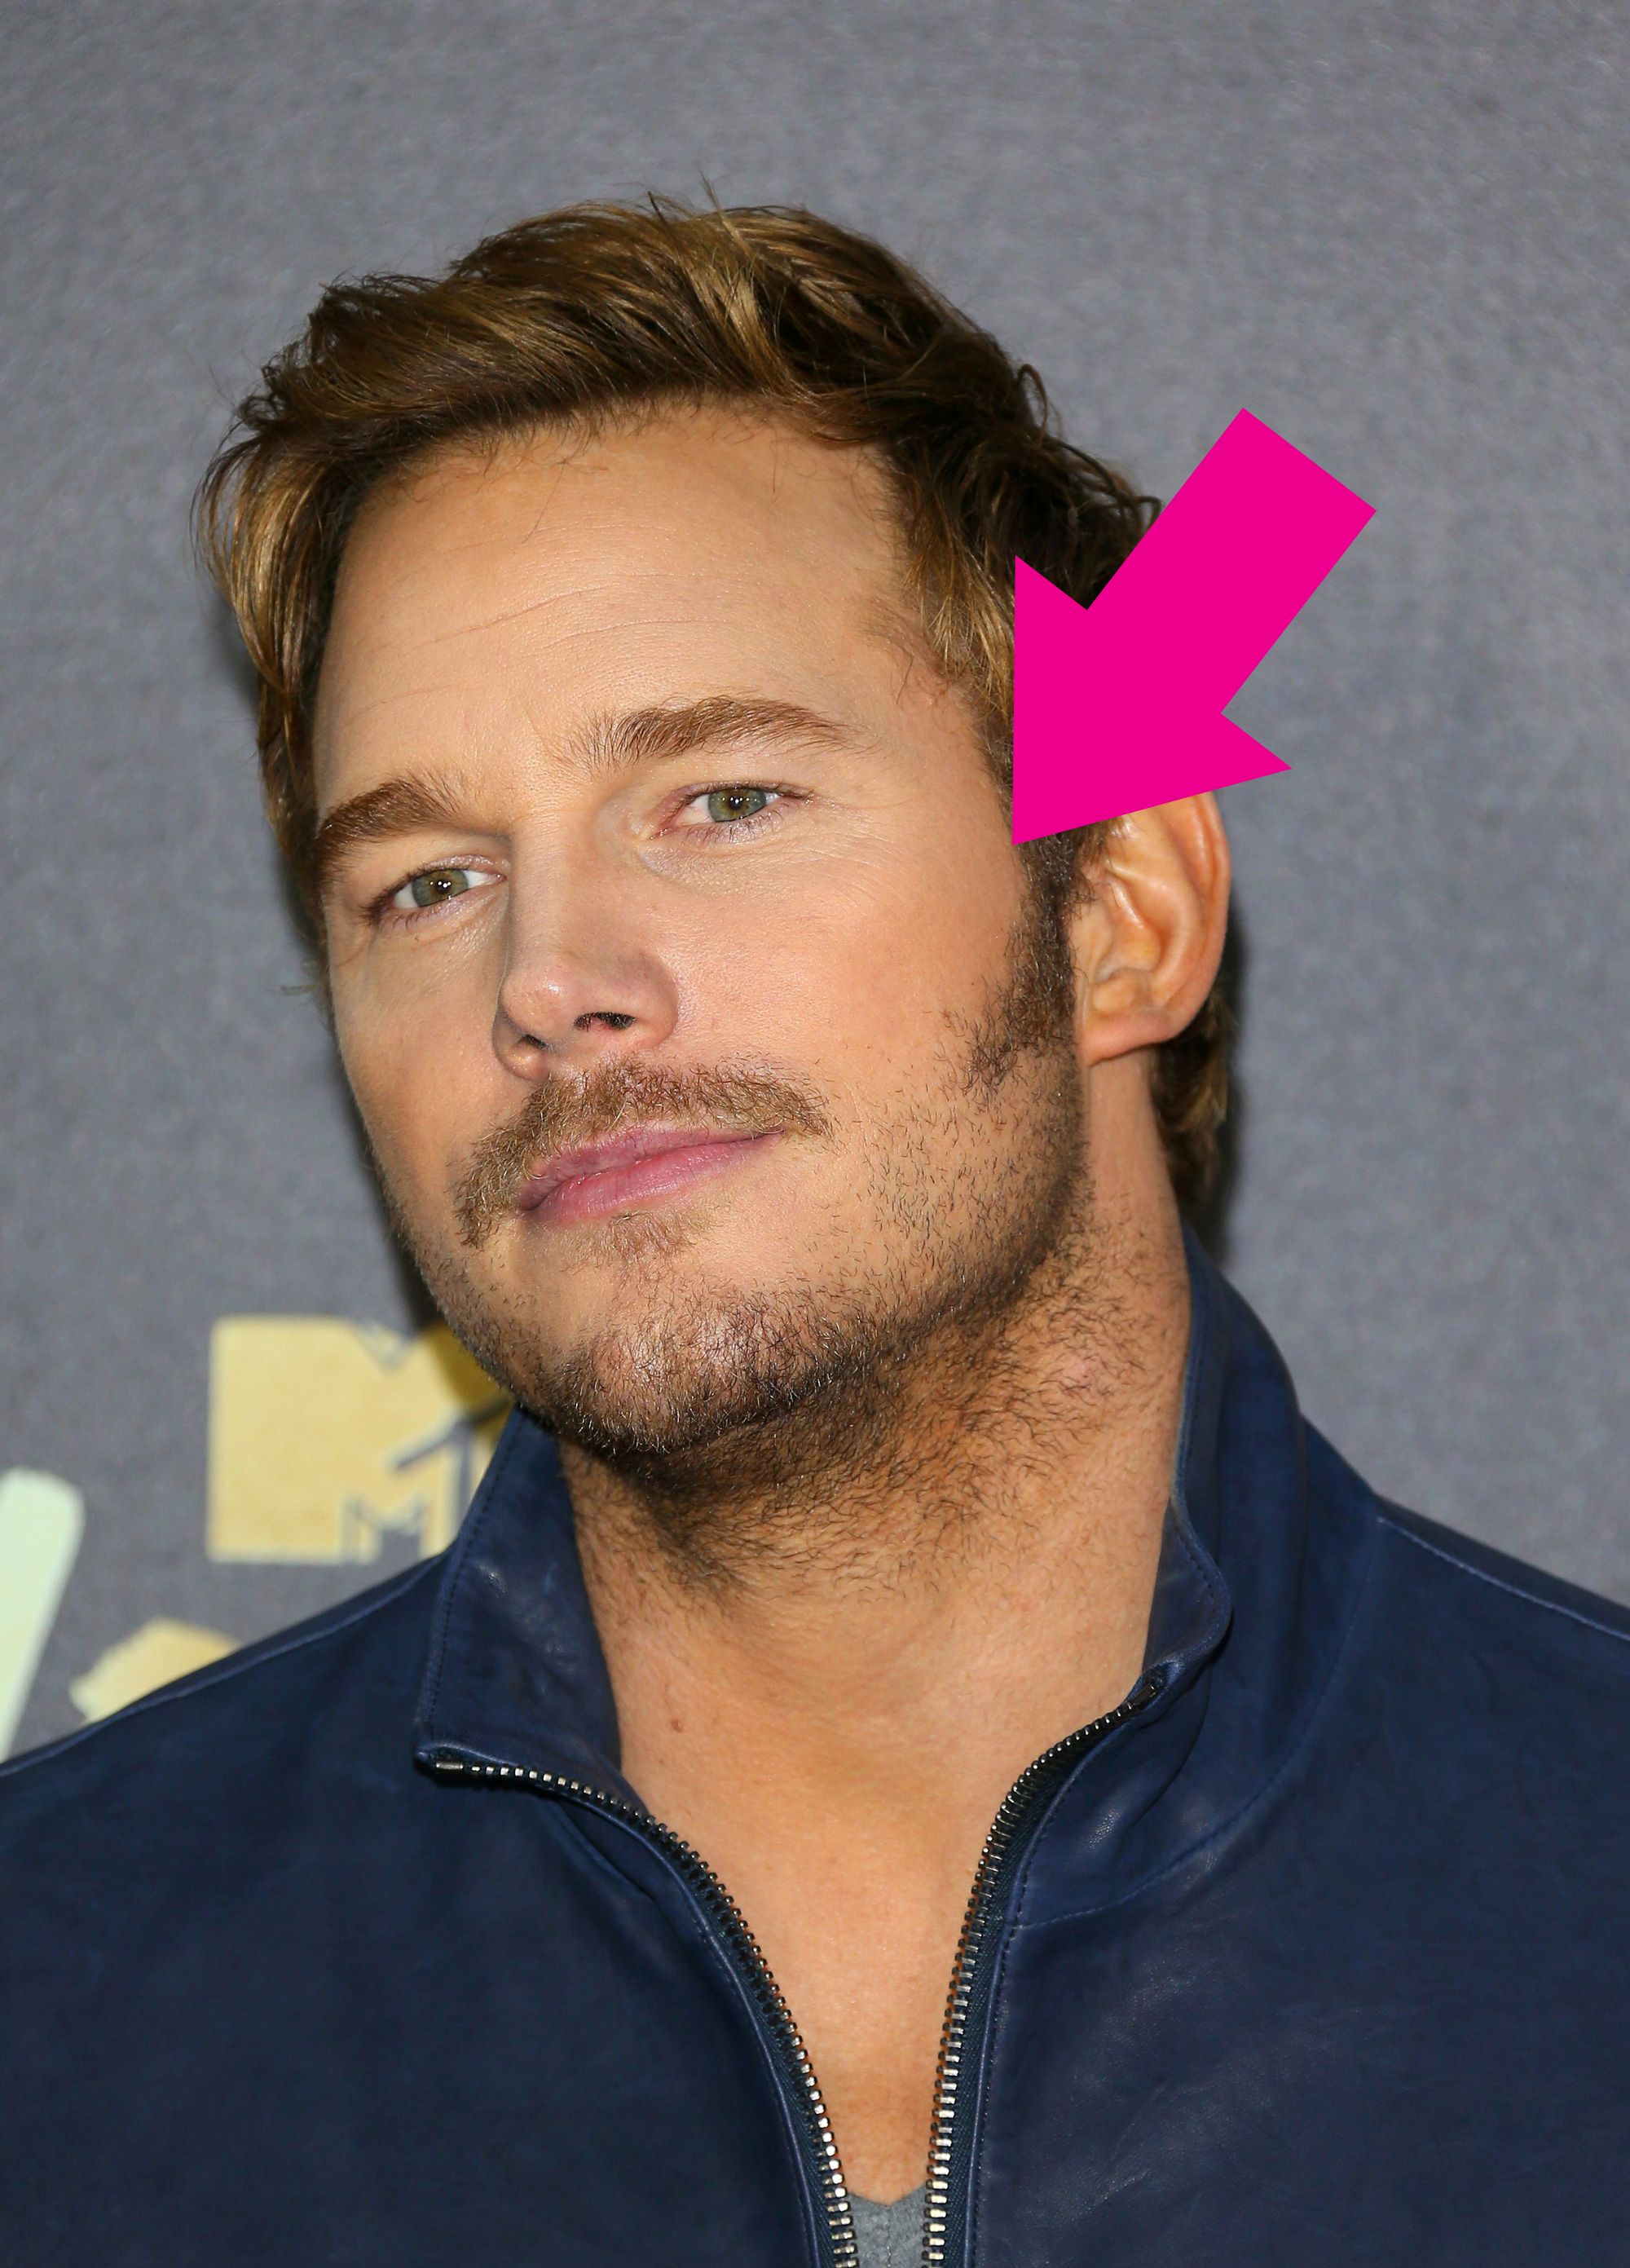 Chris Pratt Shows Off His Lighter Hair Color While Out to Lunch With Wife  Katherine Schwarzenegger Photo 4445724  Chris Pratt Katherine  Schwarzenegger Photos  Just Jared Entertainment News